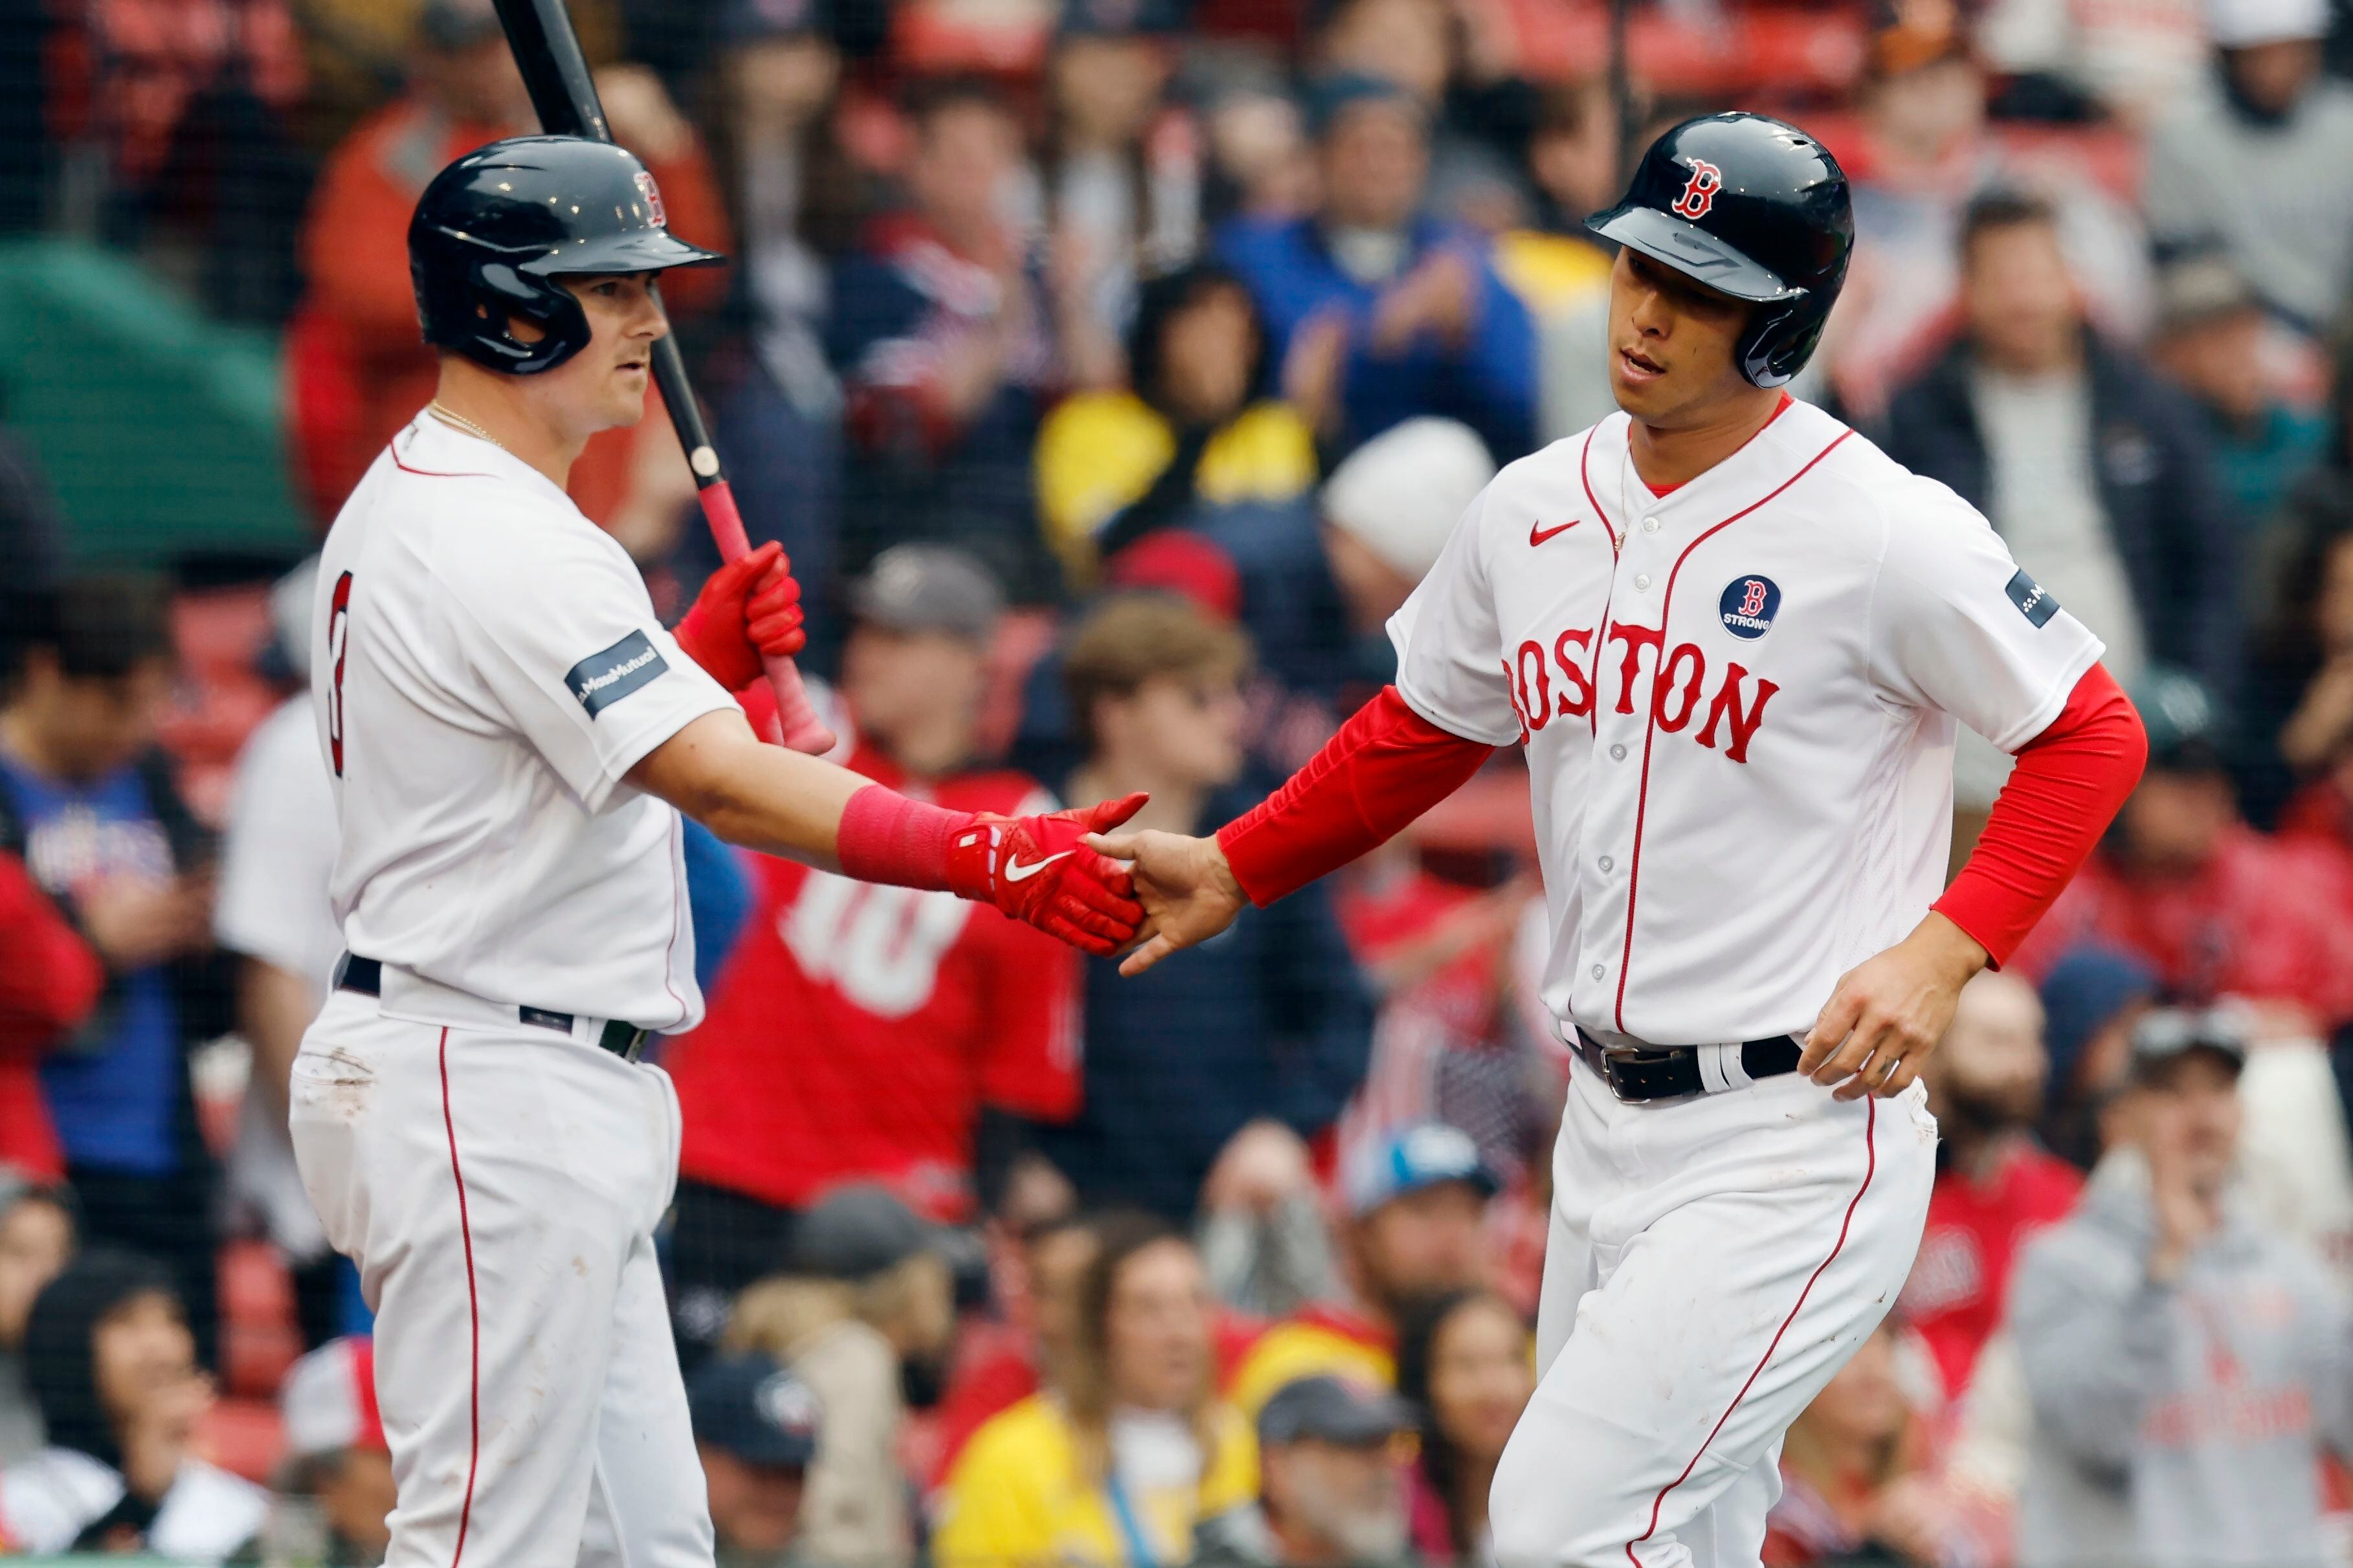 MassMutual will be advertising on the Red Sox jersey in 2023. - Over the  Monster